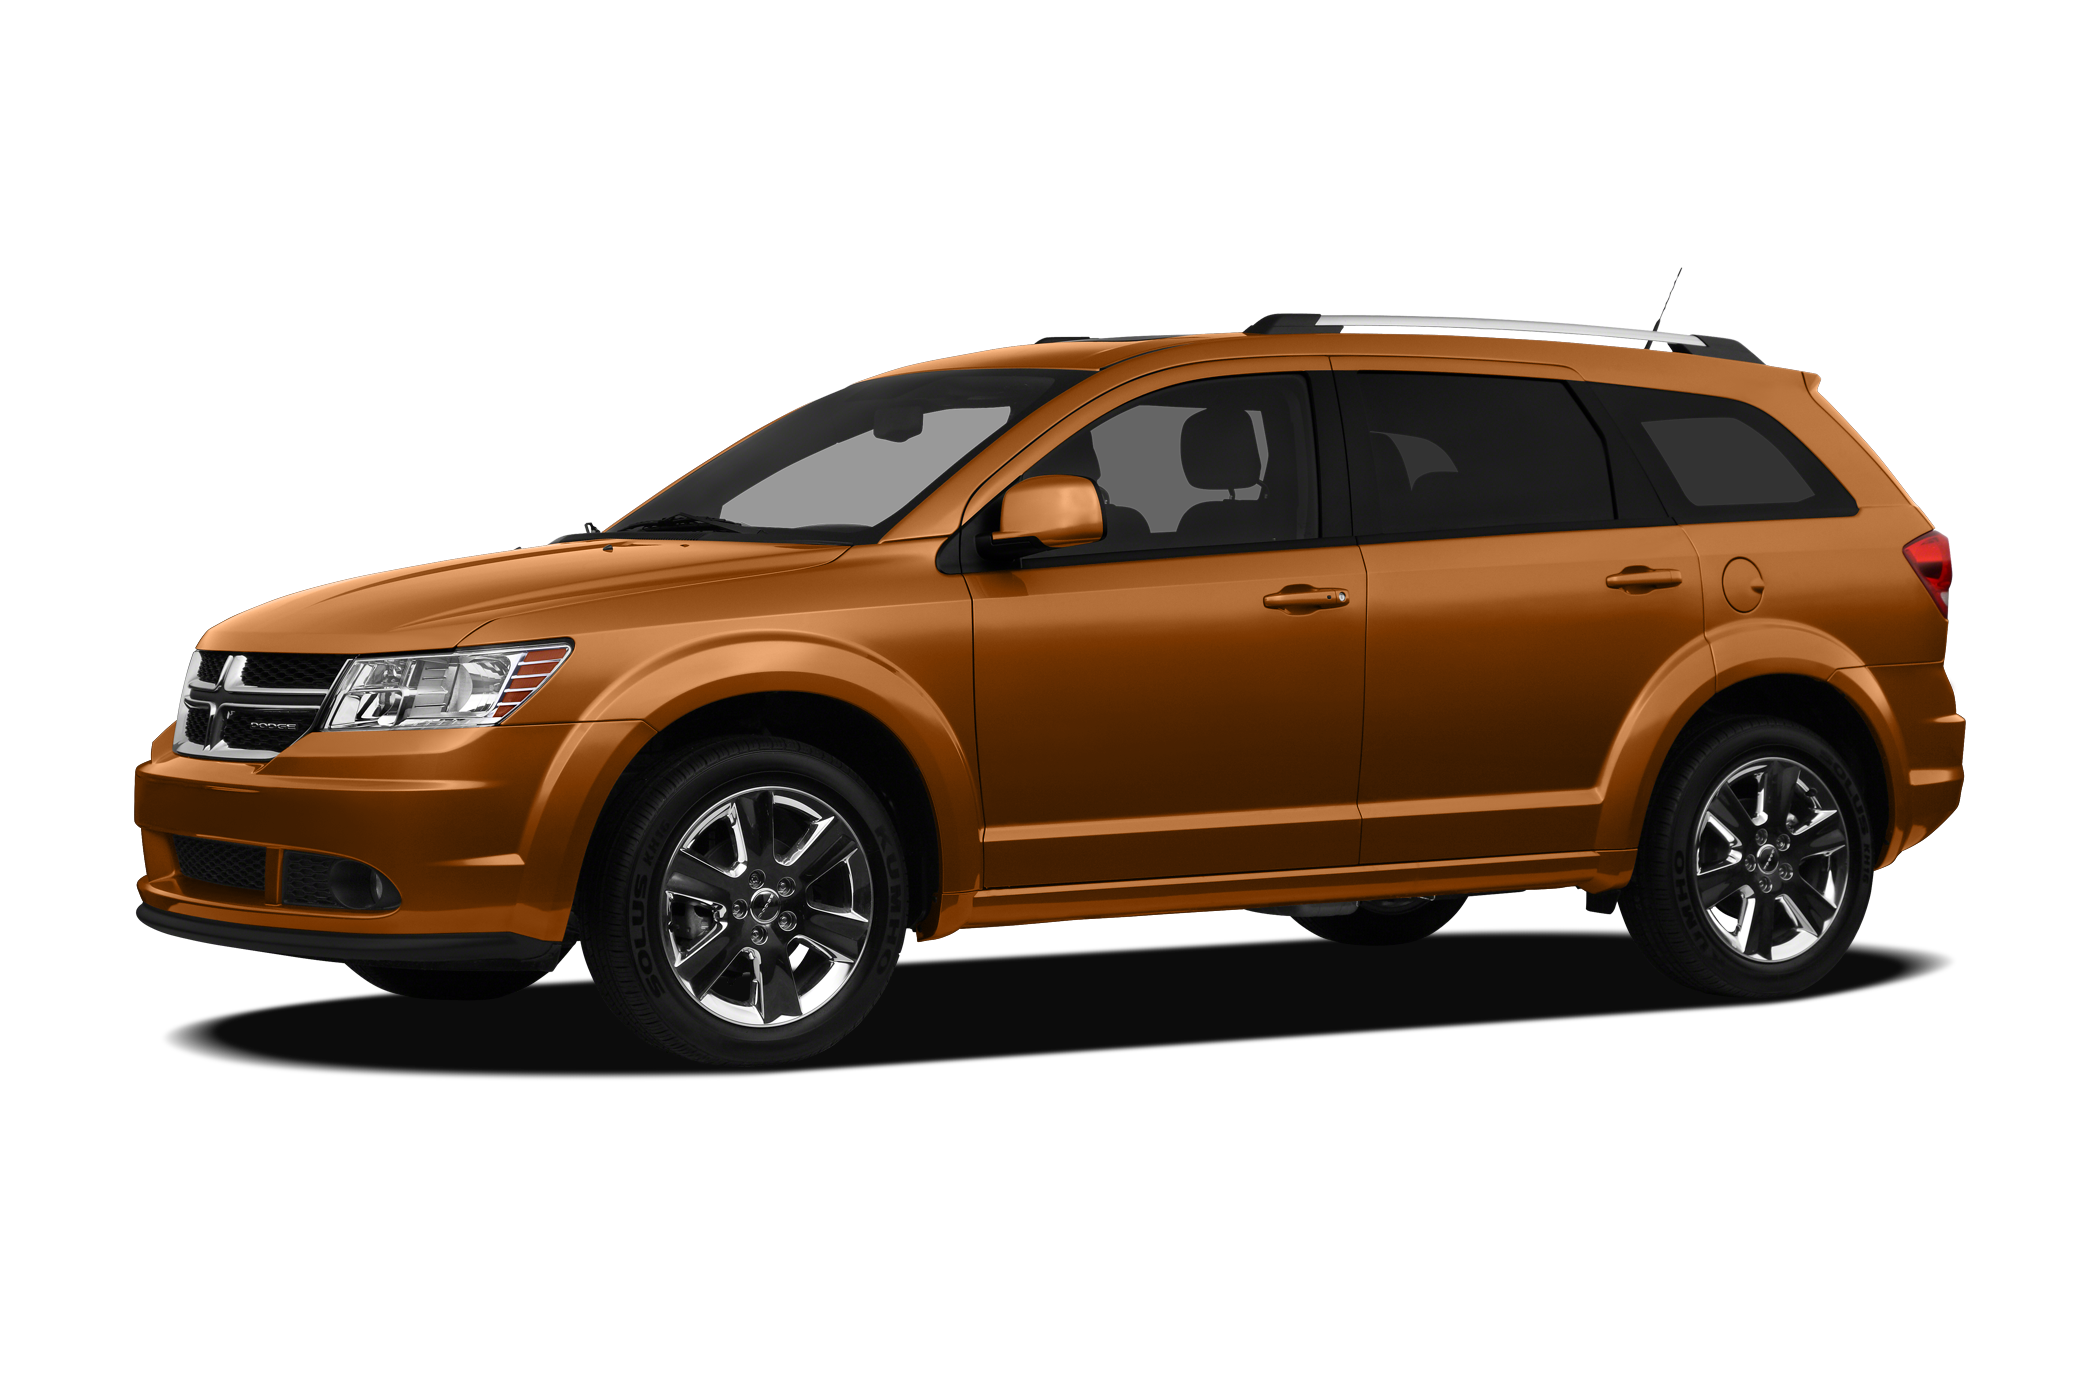 Side view of the 2012 Dodge Journey